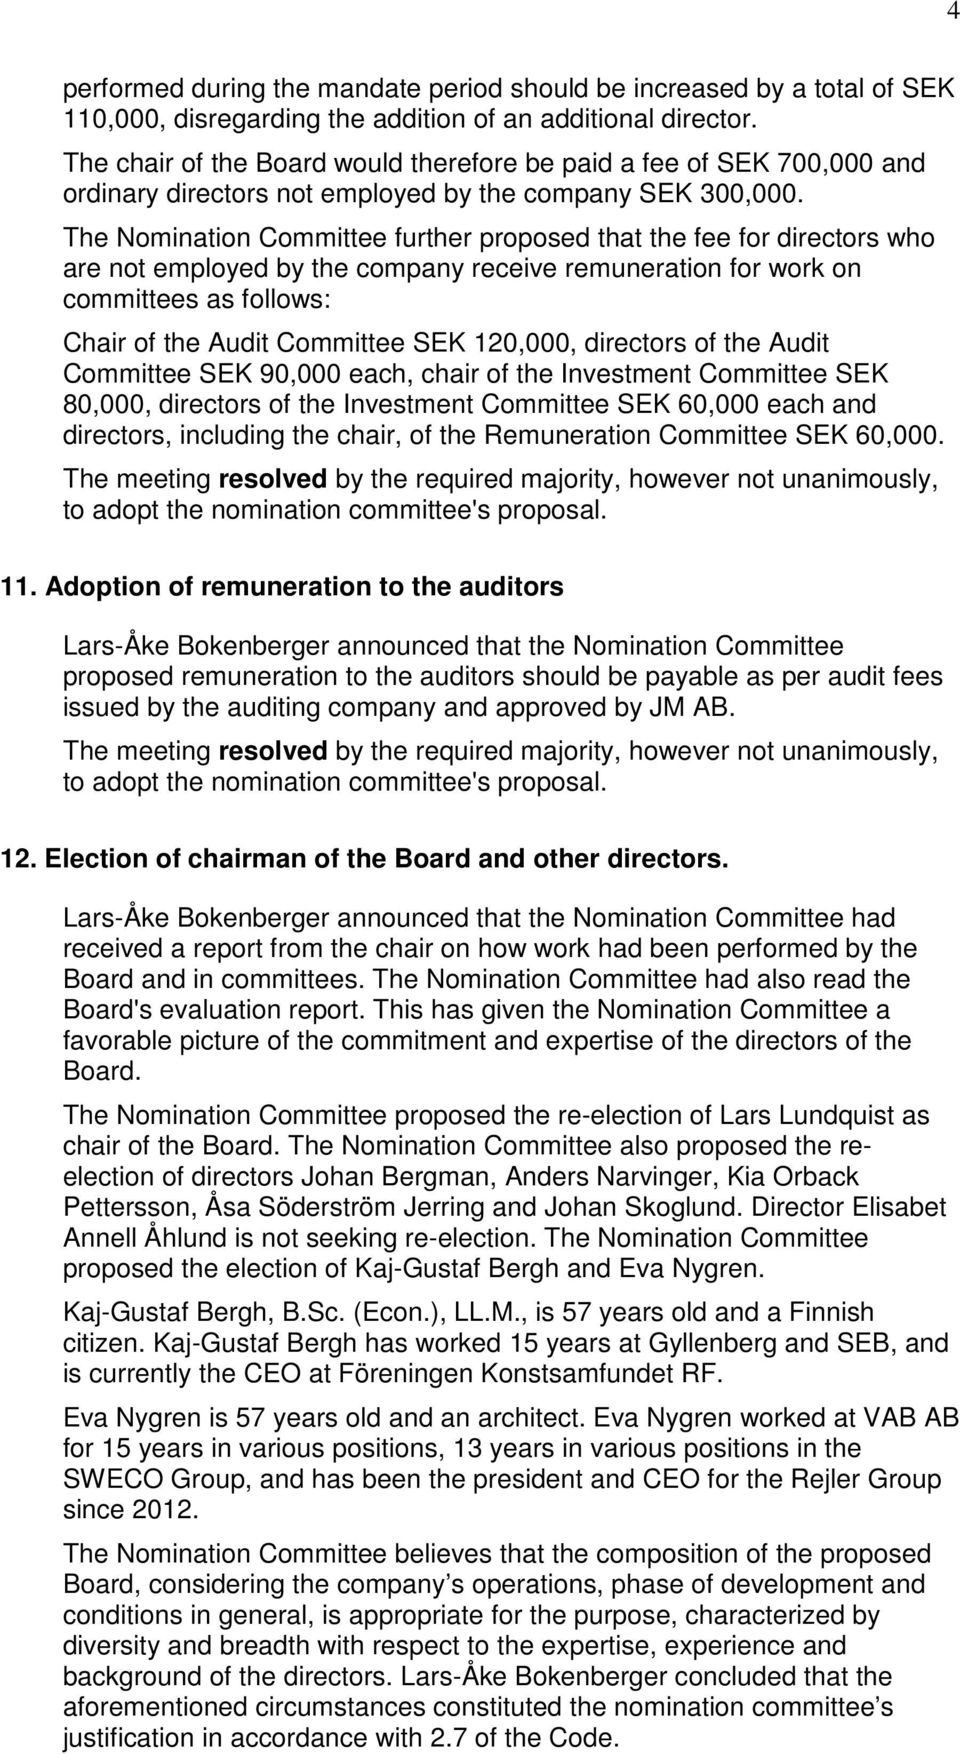 The Nomination Committee further proposed that the fee for directors who are not employed by the company receive remuneration for work on committees as follows: Chair of the Audit Committee SEK